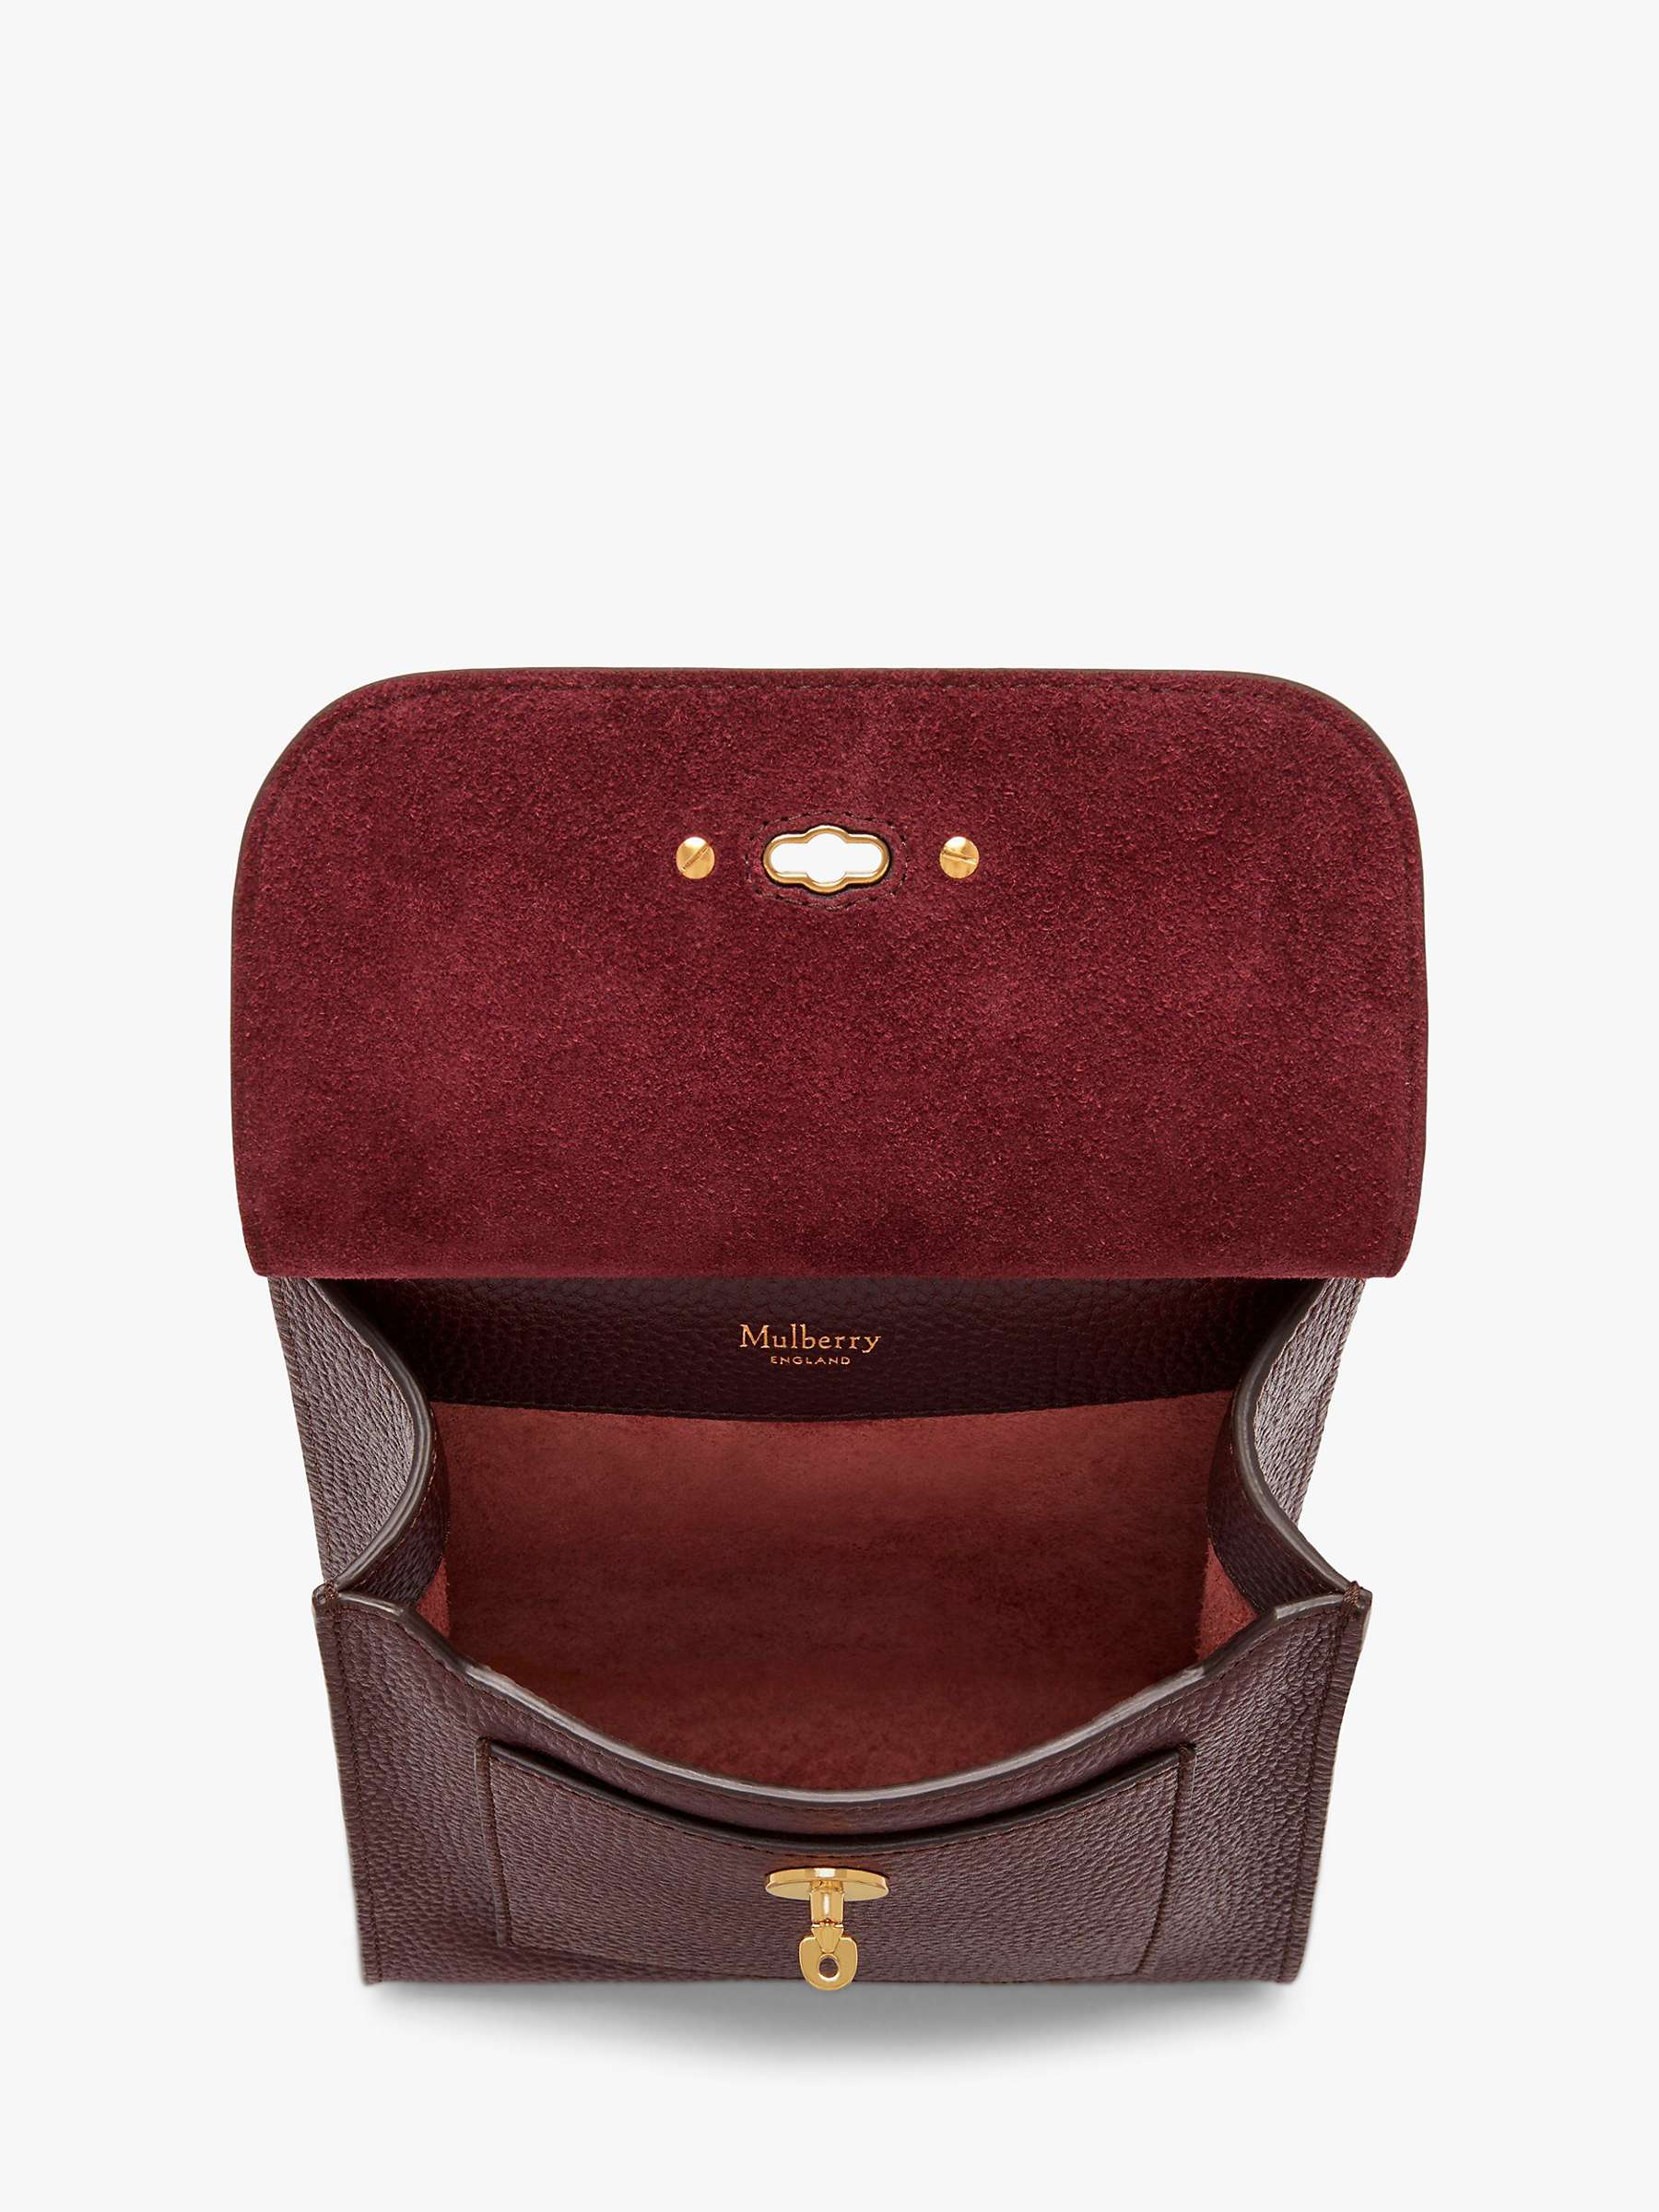 Mulberry Small Antony Classic Grain Leather Satchel, Oxblood at